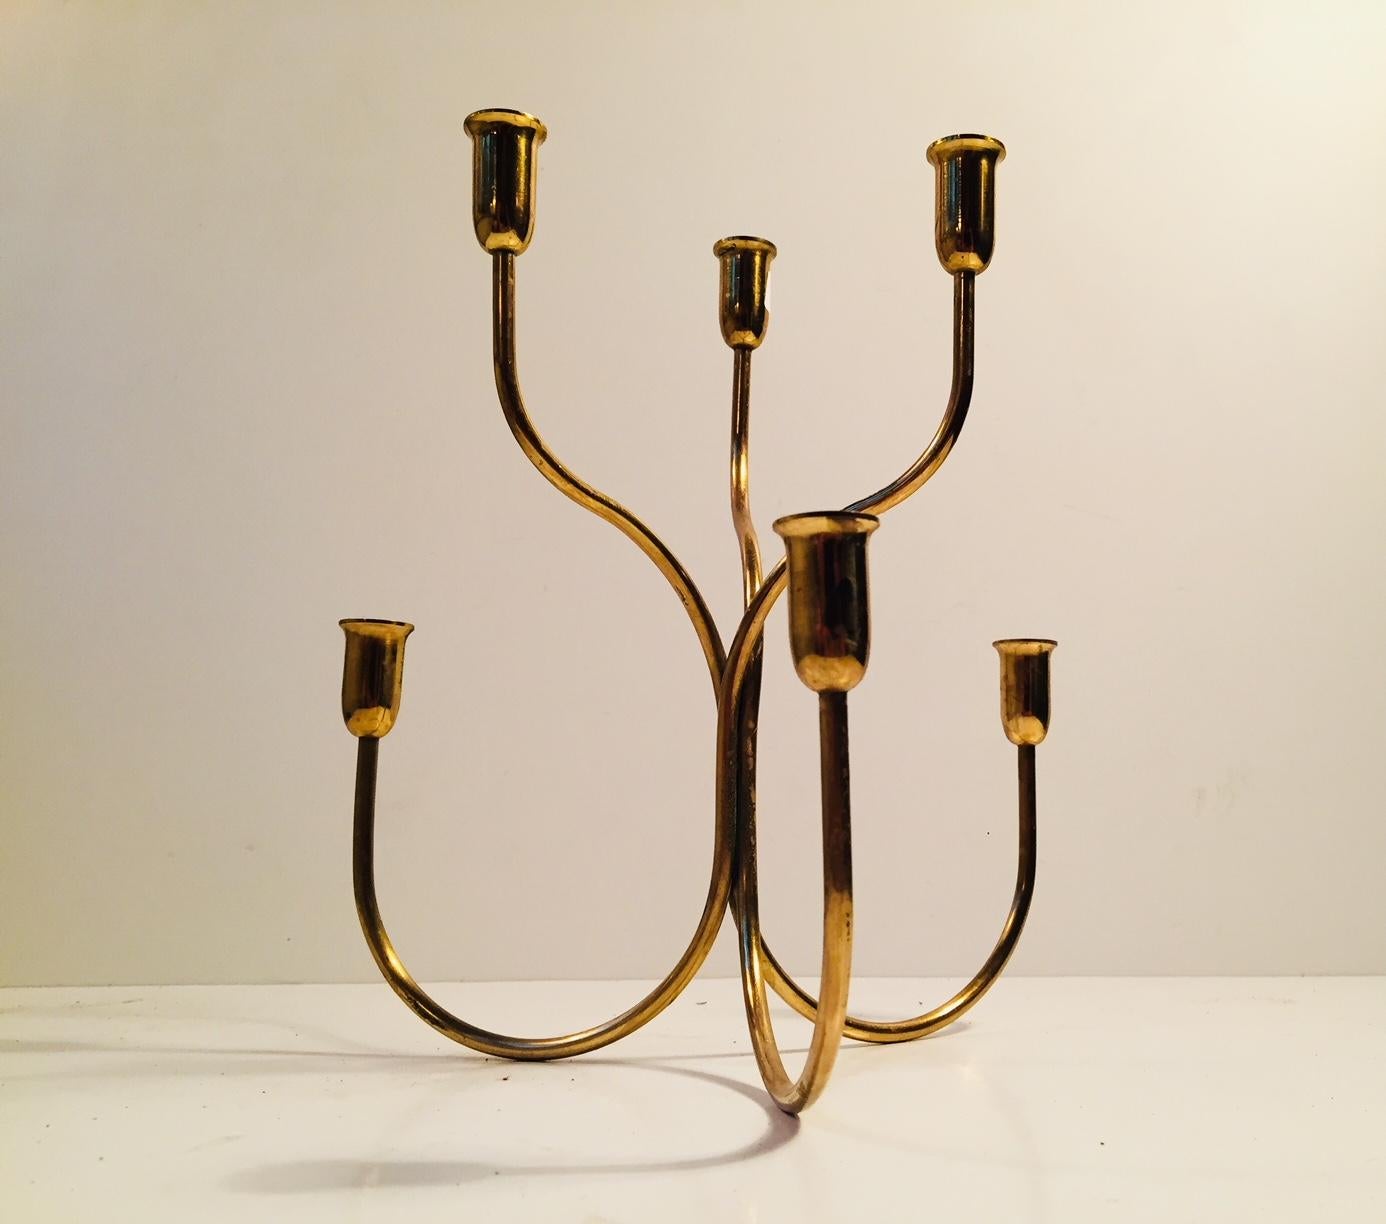 Two tiered serpentine candle holder in wire brass designed by Josef Frank and manufactured by Svenskt Tenn in Sweden during the 1960s. Please notice that this version is for thin candles (Diameter approx. 1 cm).